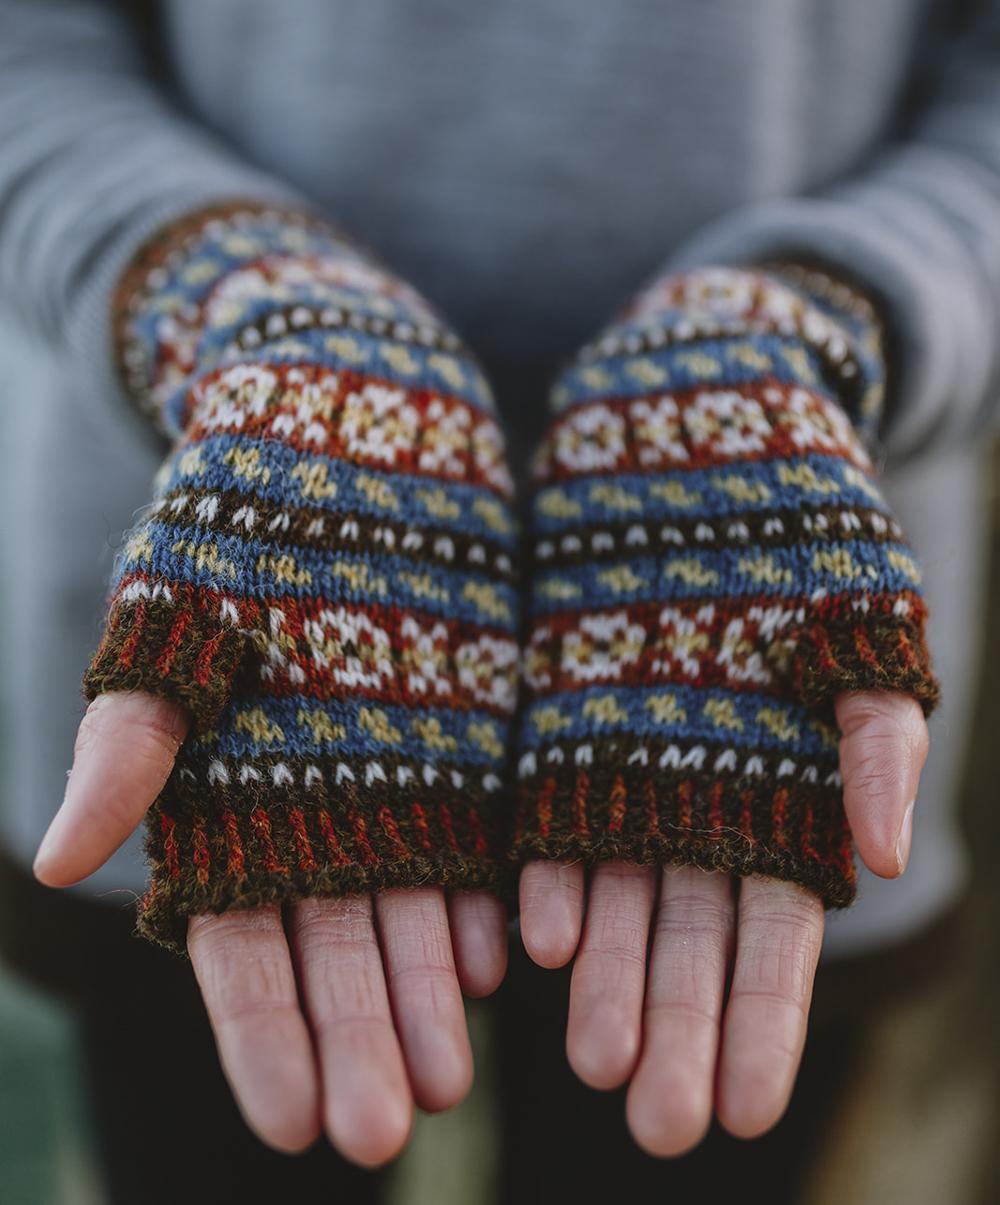 Hesti Mitts - hands are open to reveal a pair of fingerless mitts featuring small (peerie) patterns in the traditional palette of dark reds, indigo blues, golds and browns and greys used by Shetlanders prior to widespread availability of synthetic dyes